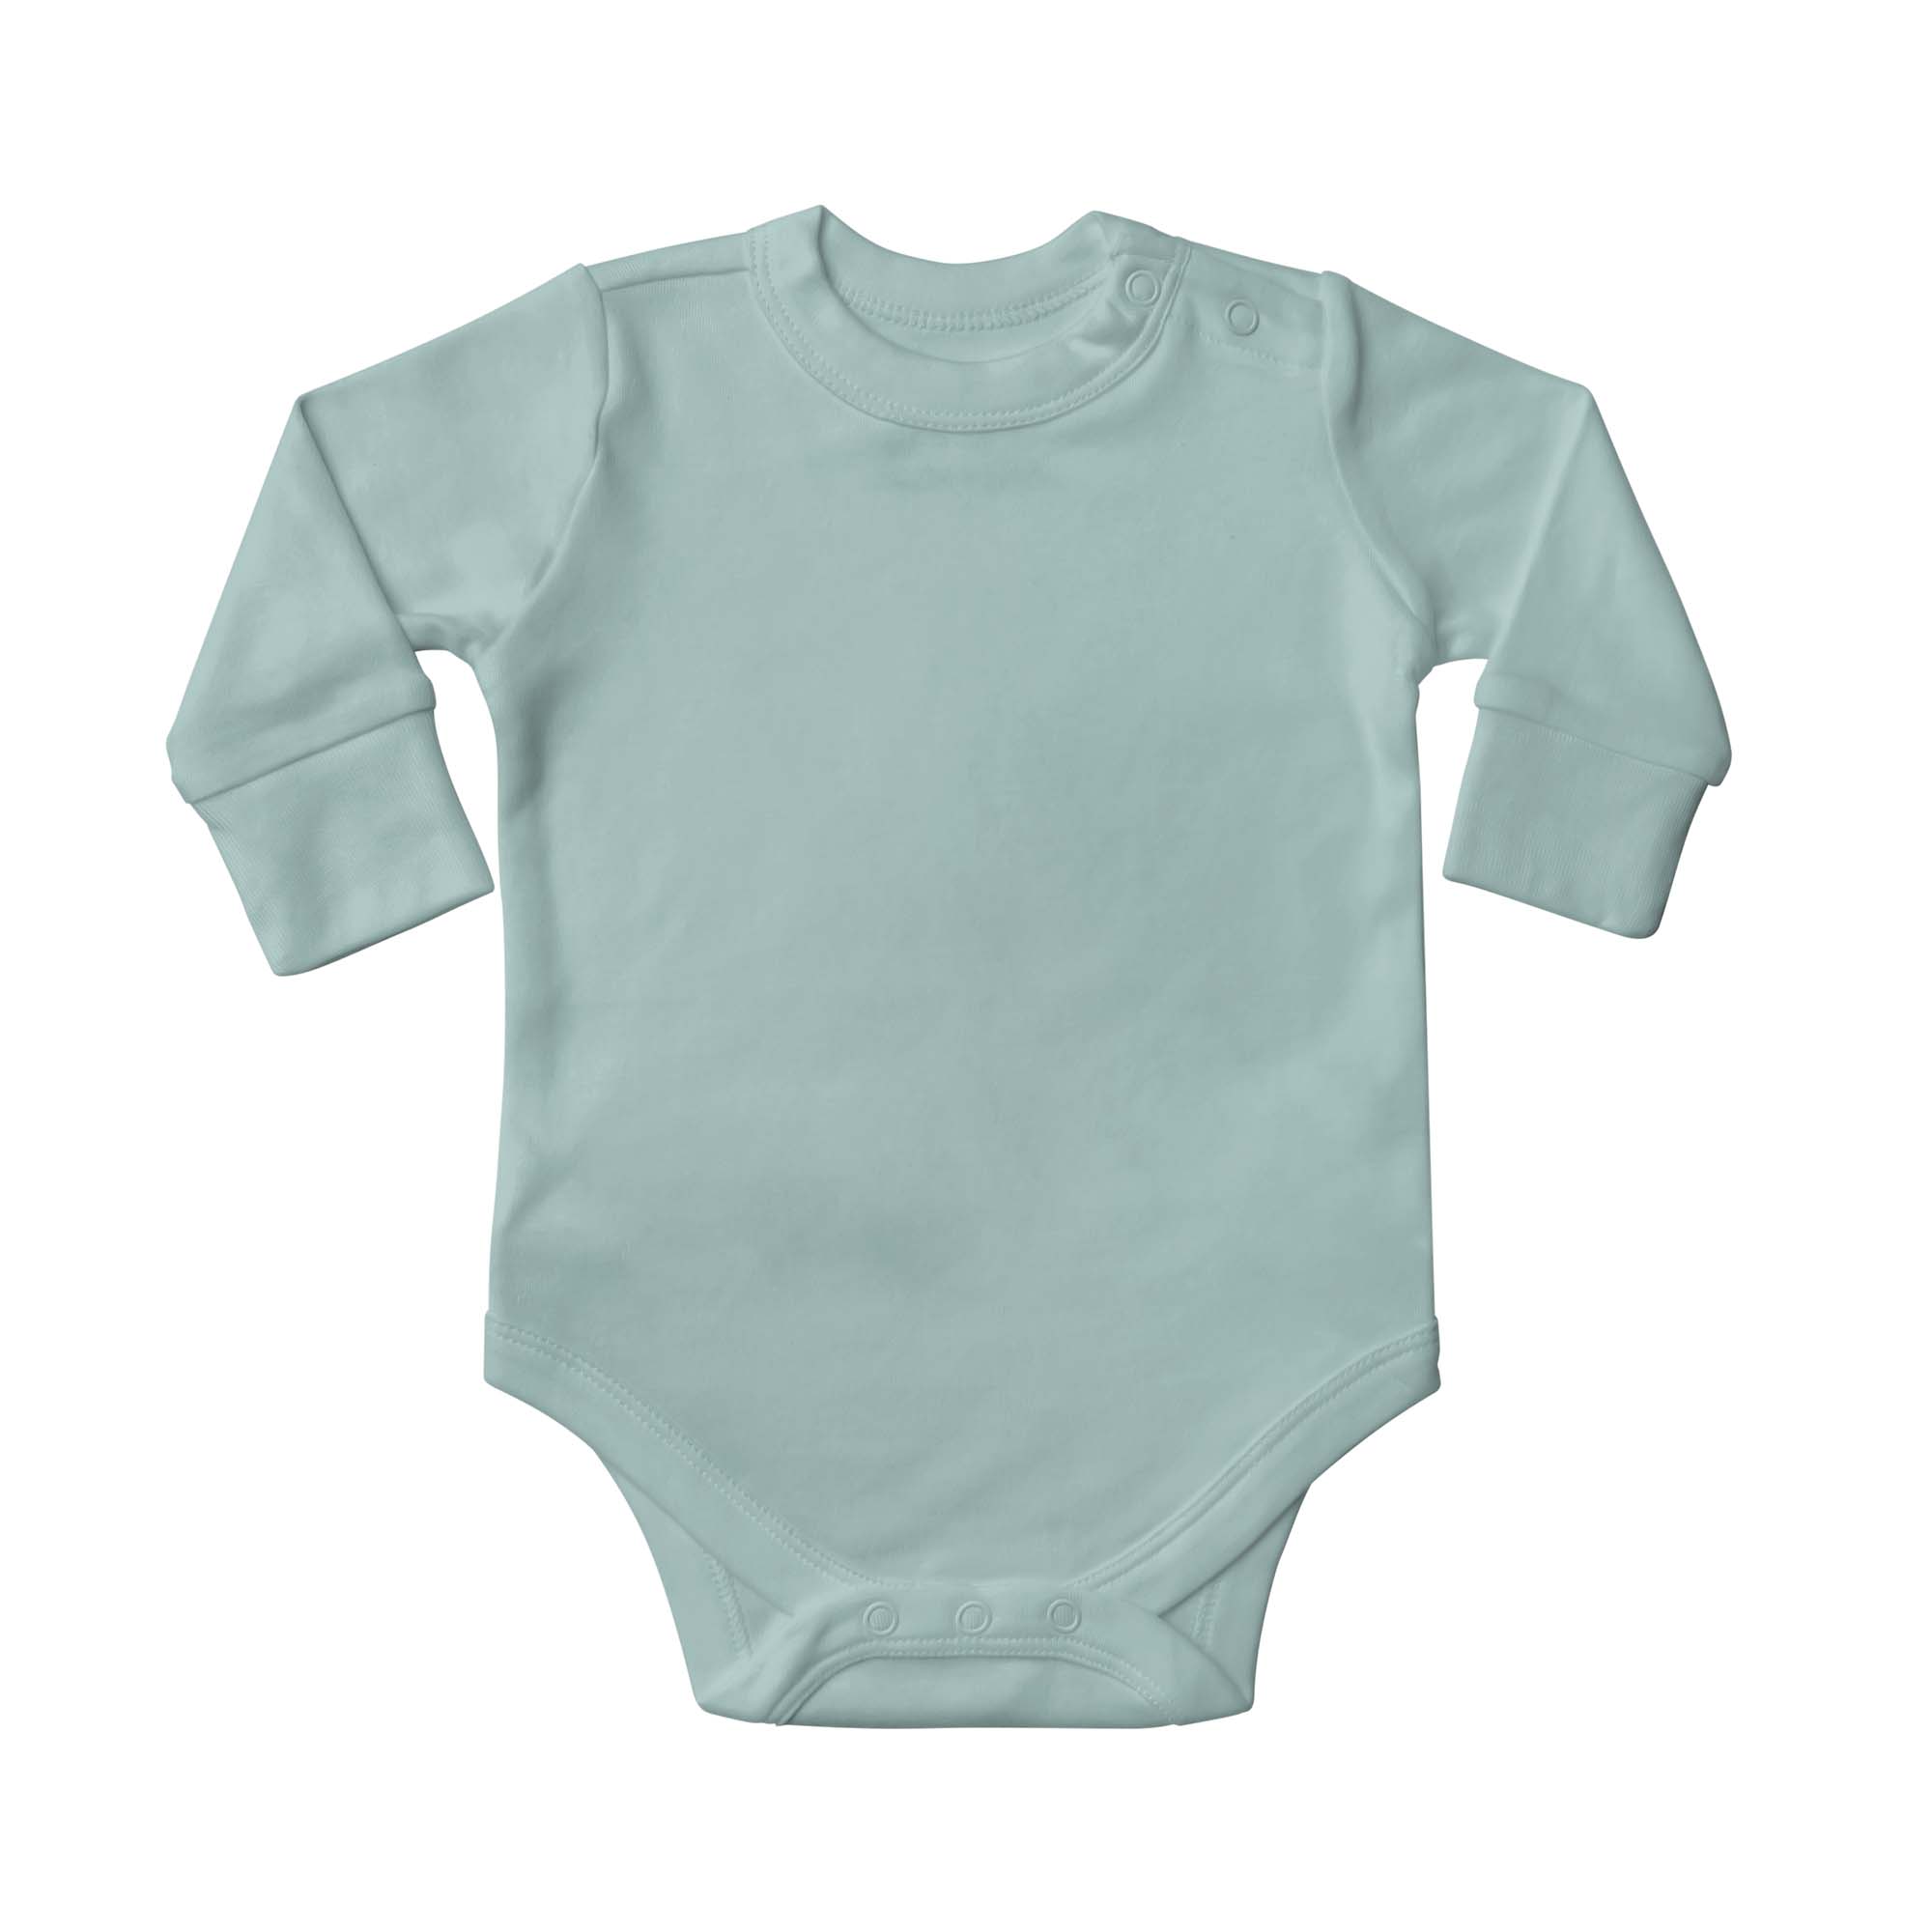 LONG-SLEEVE BODYSUIT | SEA GLASS | FITS SMALL SIZE UP